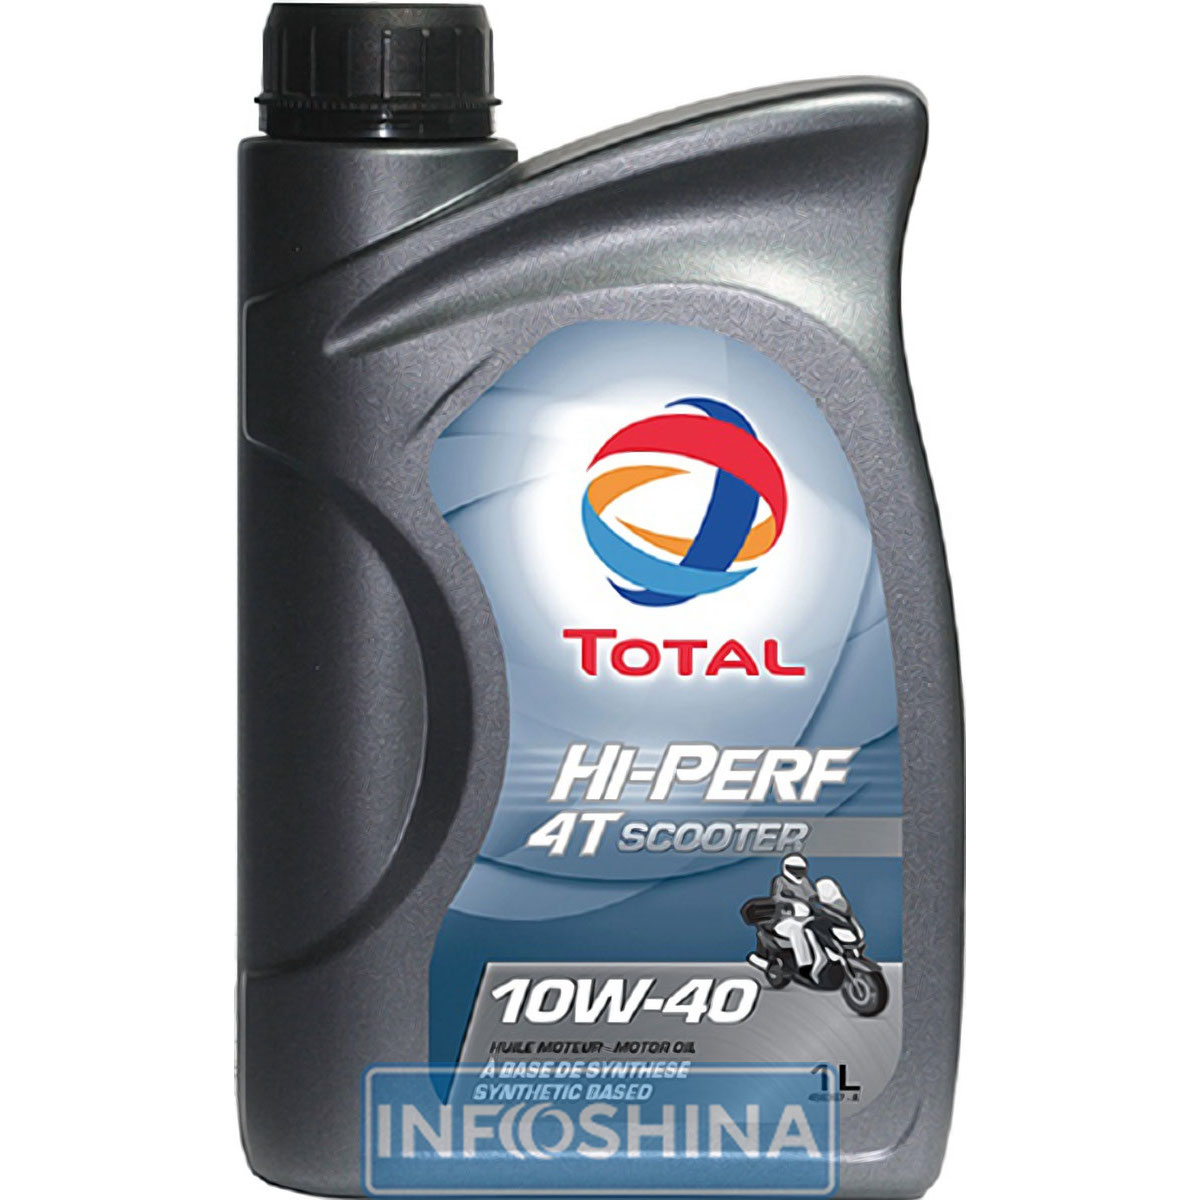 Total Hi-Perf 4T Scooter 10W-40